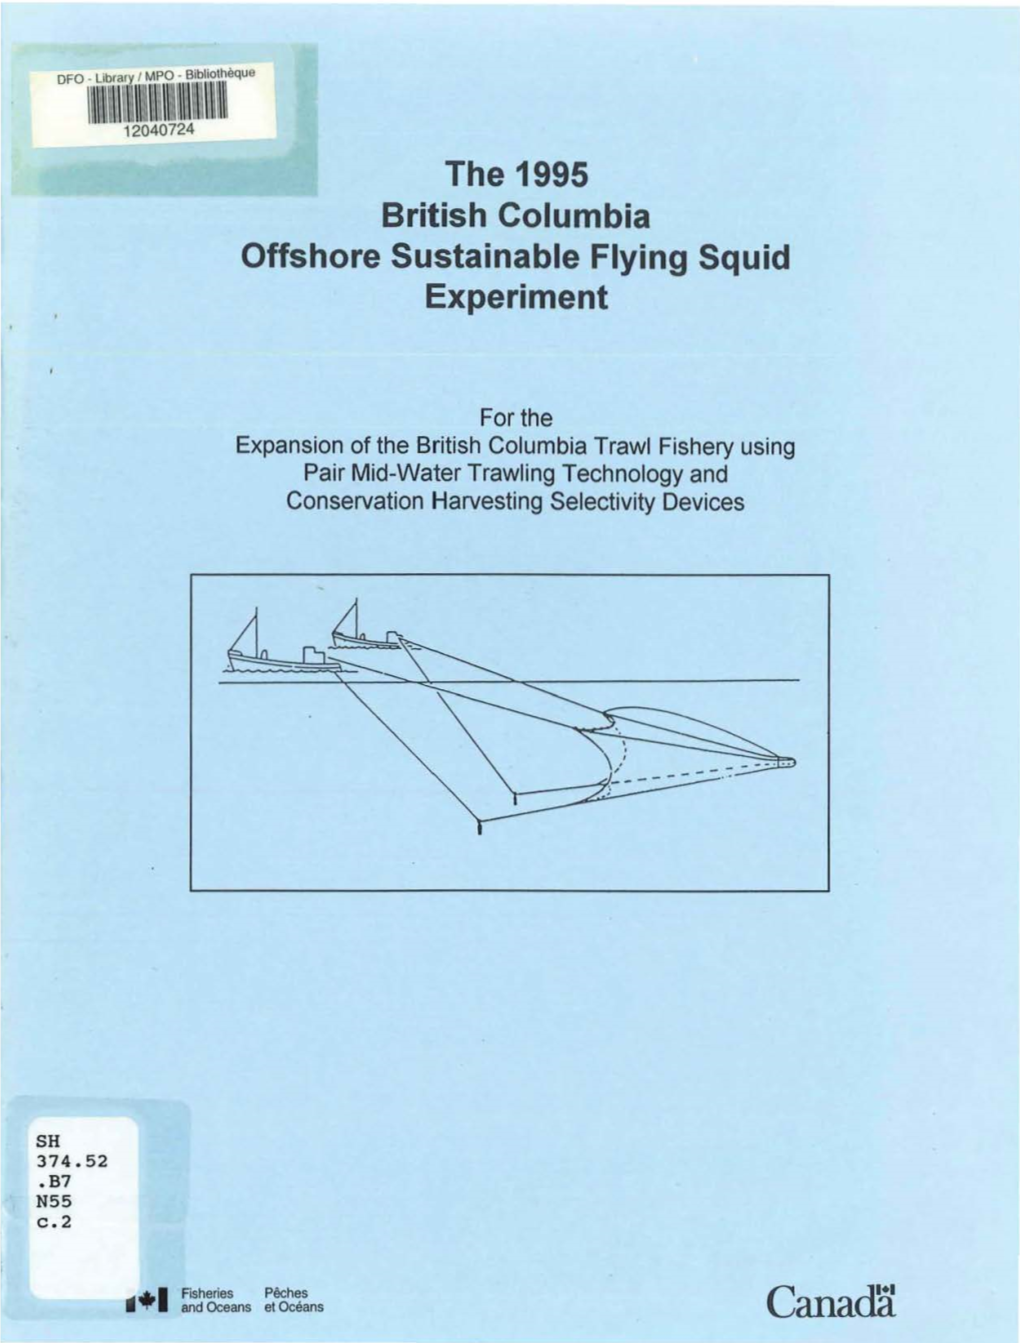 For the Expansion of the British Columbia Trawl Fishery Using Pair Mid-Water Trawling Technology and Conservation Harvesting Selectivity Devices